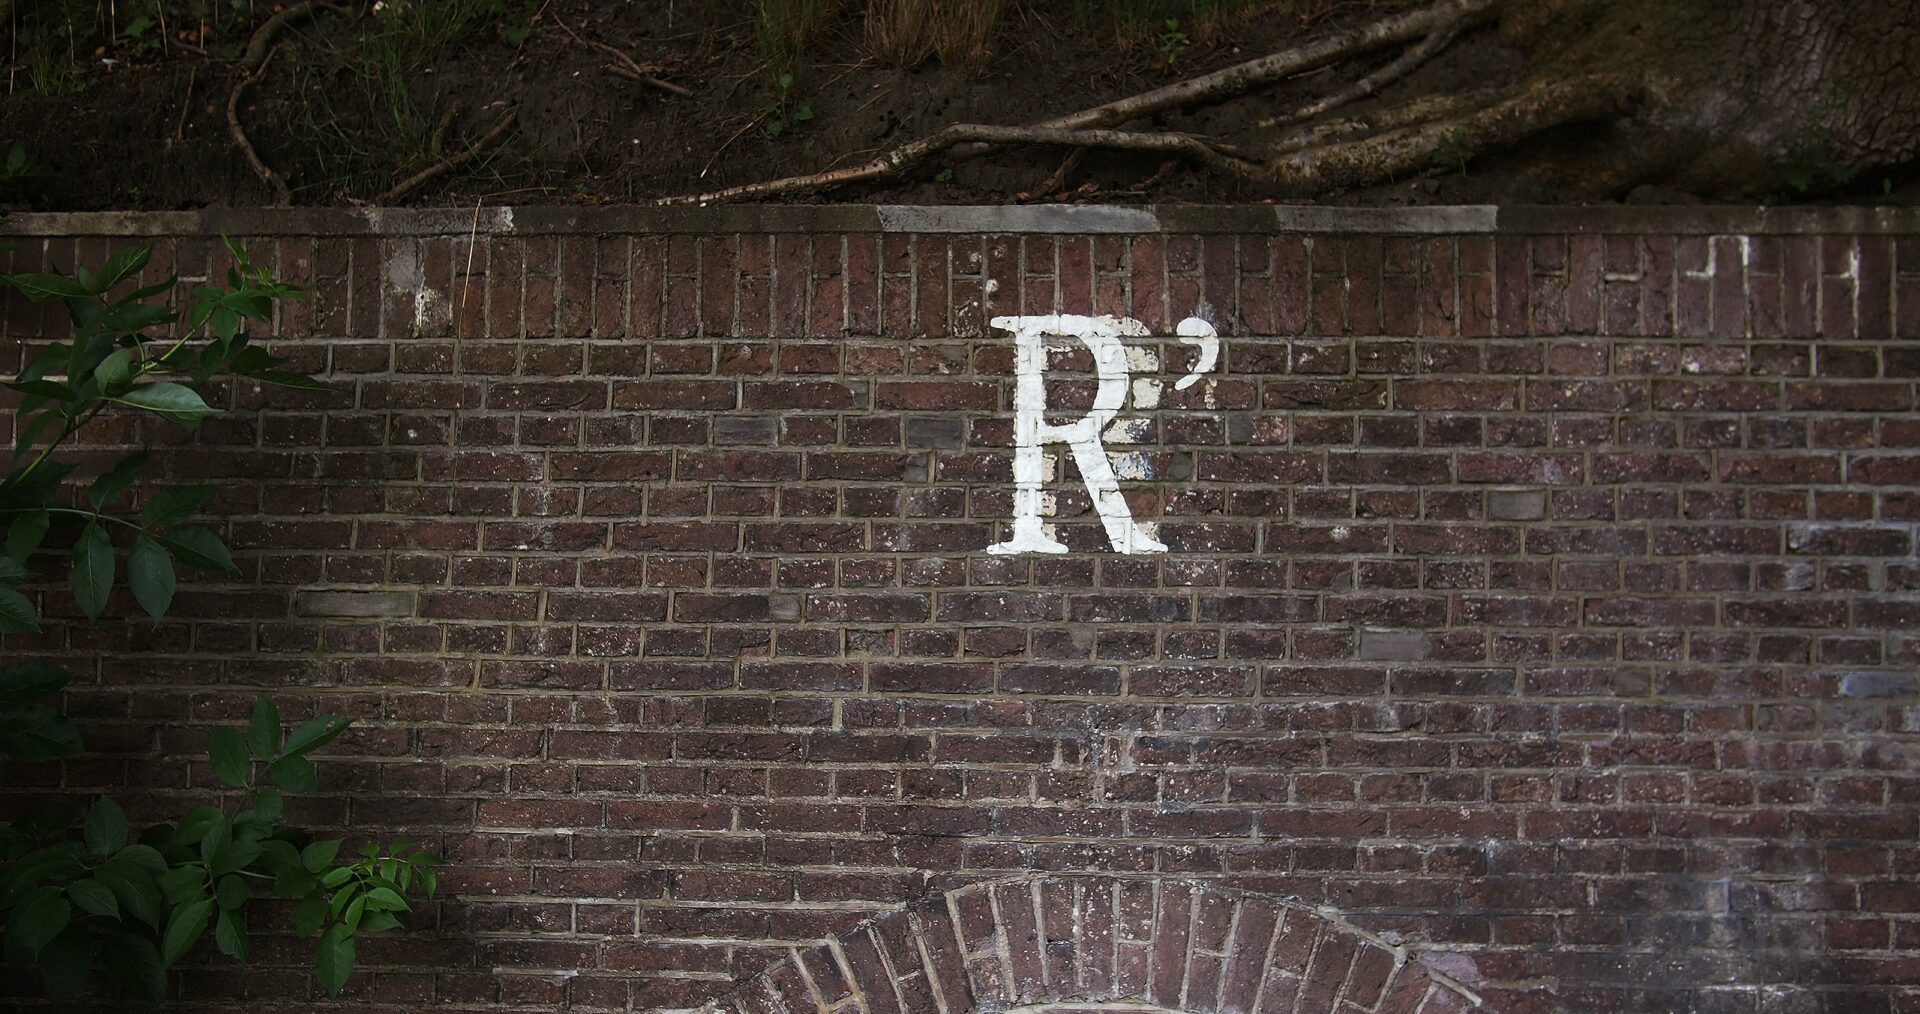 The capital letter R is painted in faded white paint on top of some dark, red bricks in an urban setting